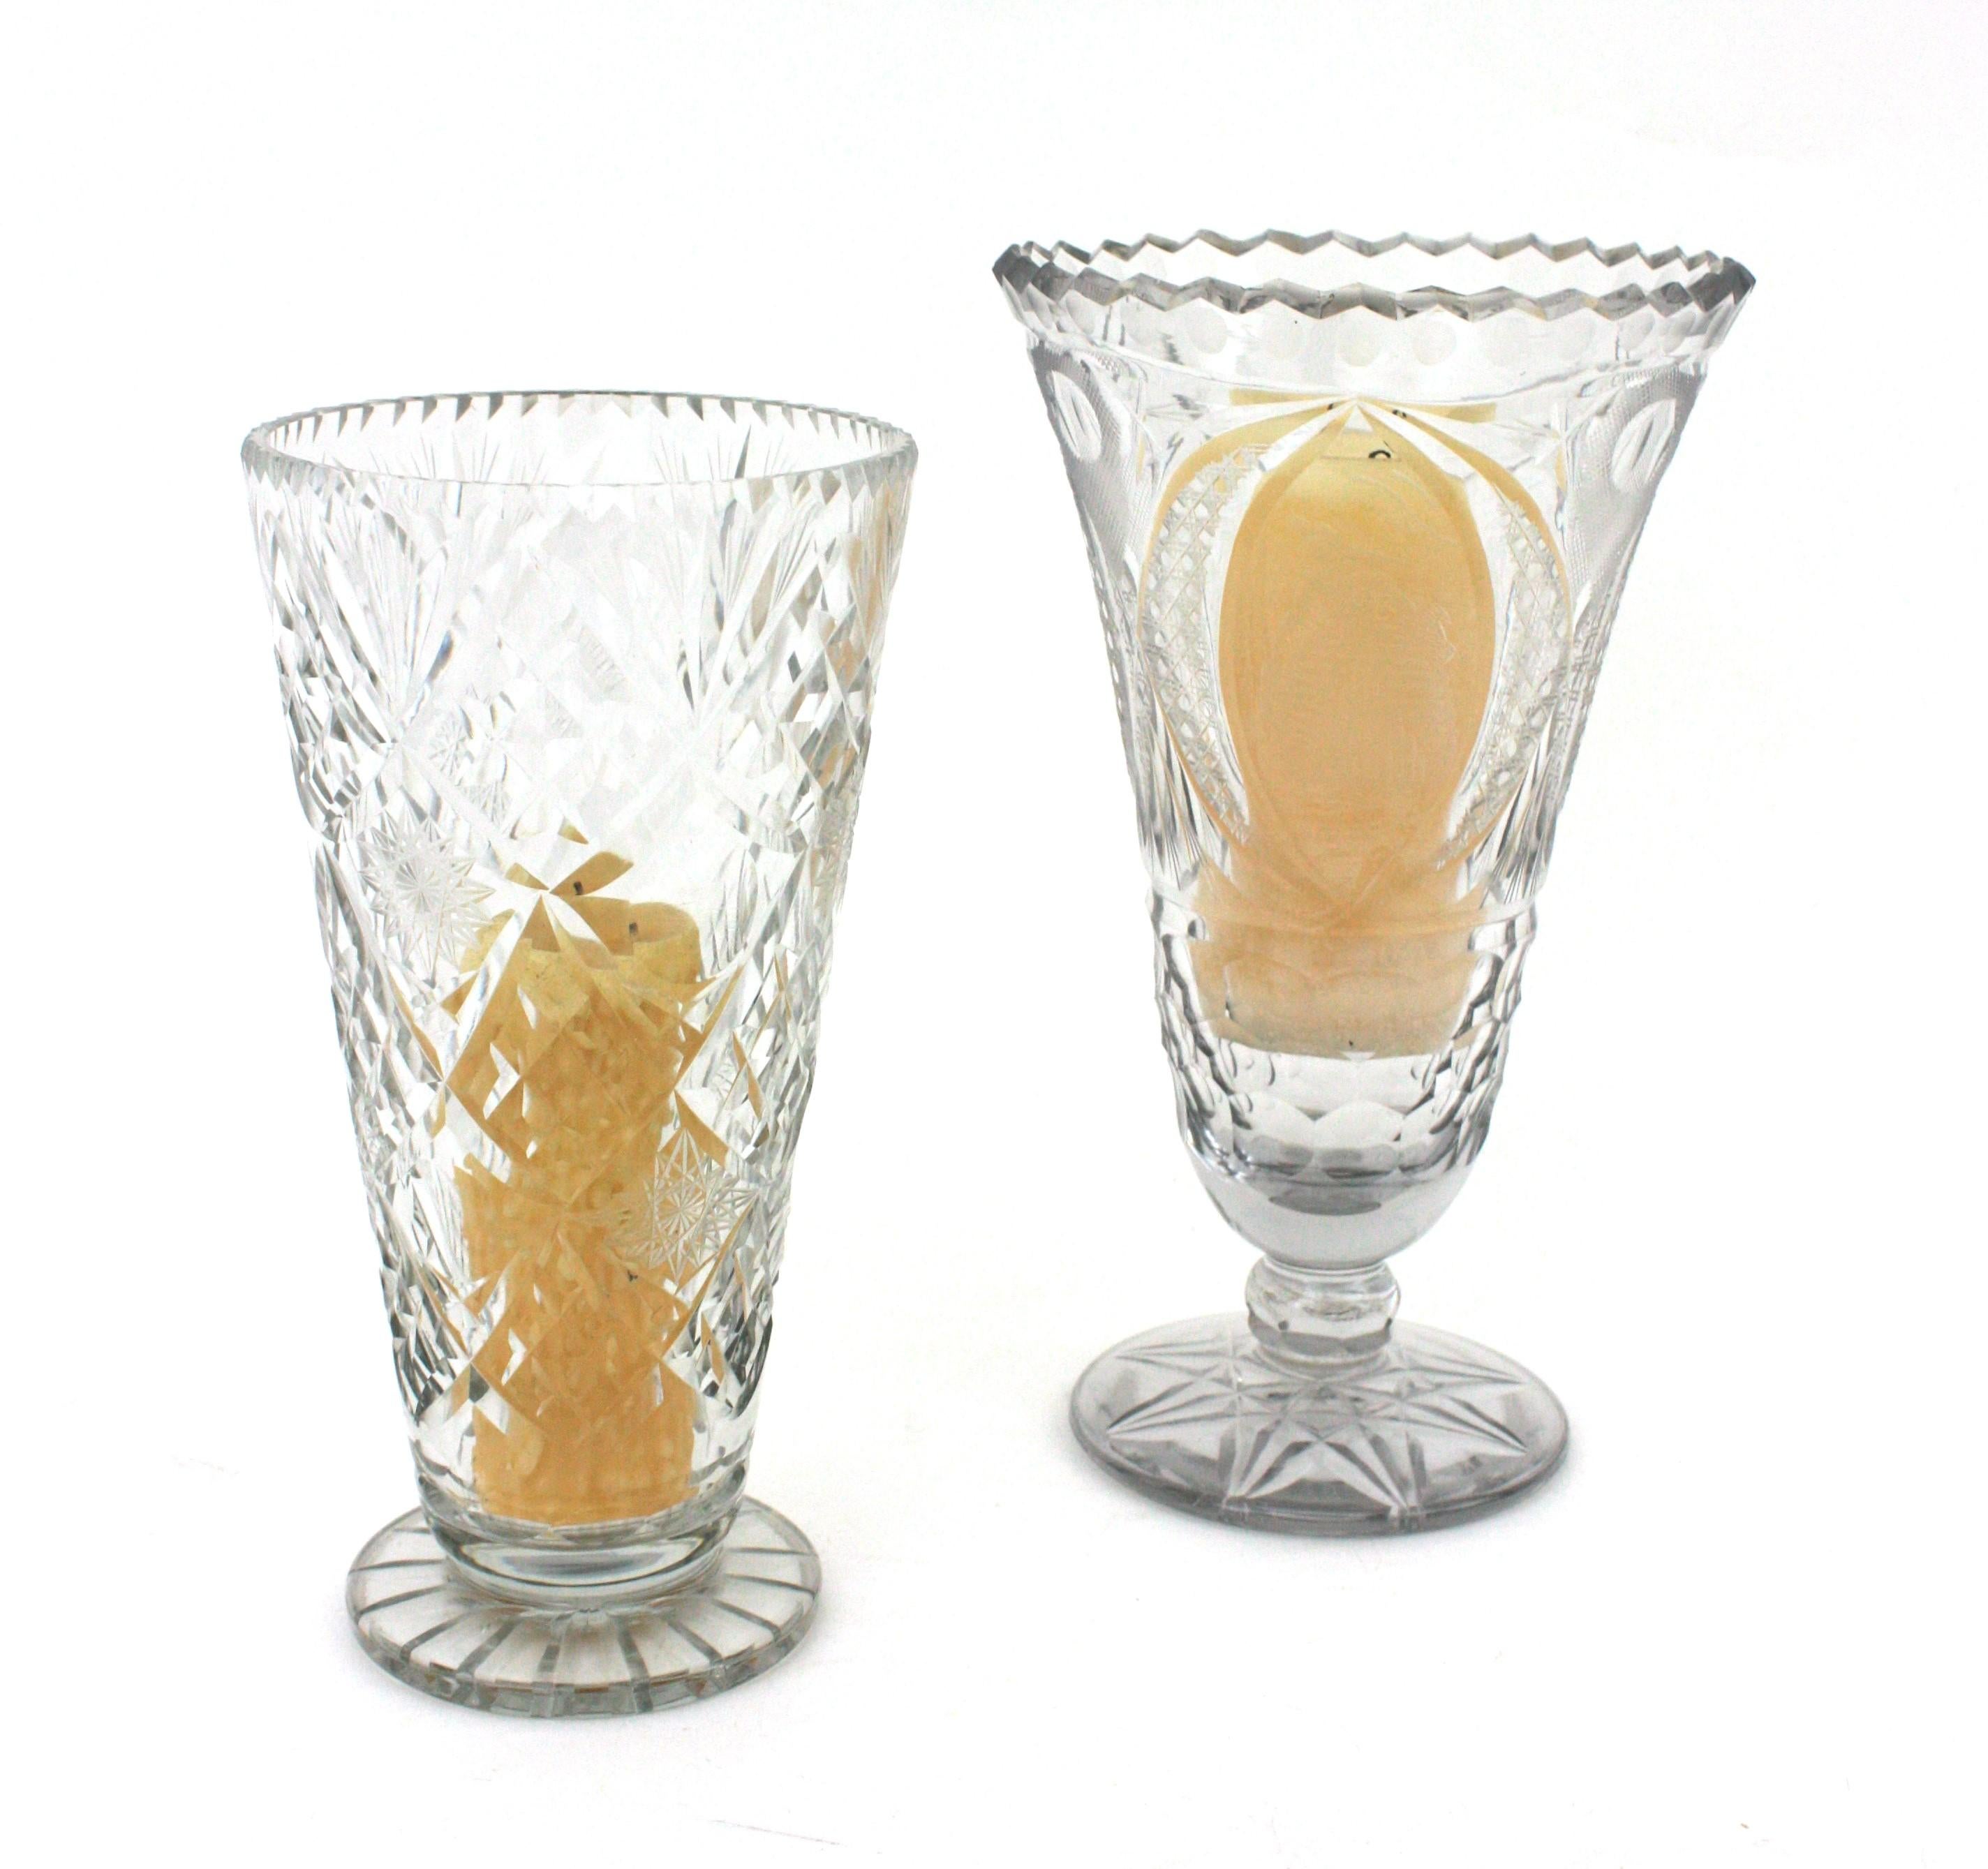 Eye-catching pair of cut crystal vases with scalloped and serrated tops. Spain, 1930s.
Both are finely executed with very detailed cut cristal patterns thorough.
Each one has a different cut crystal patterned design, both in excellent condition.
To